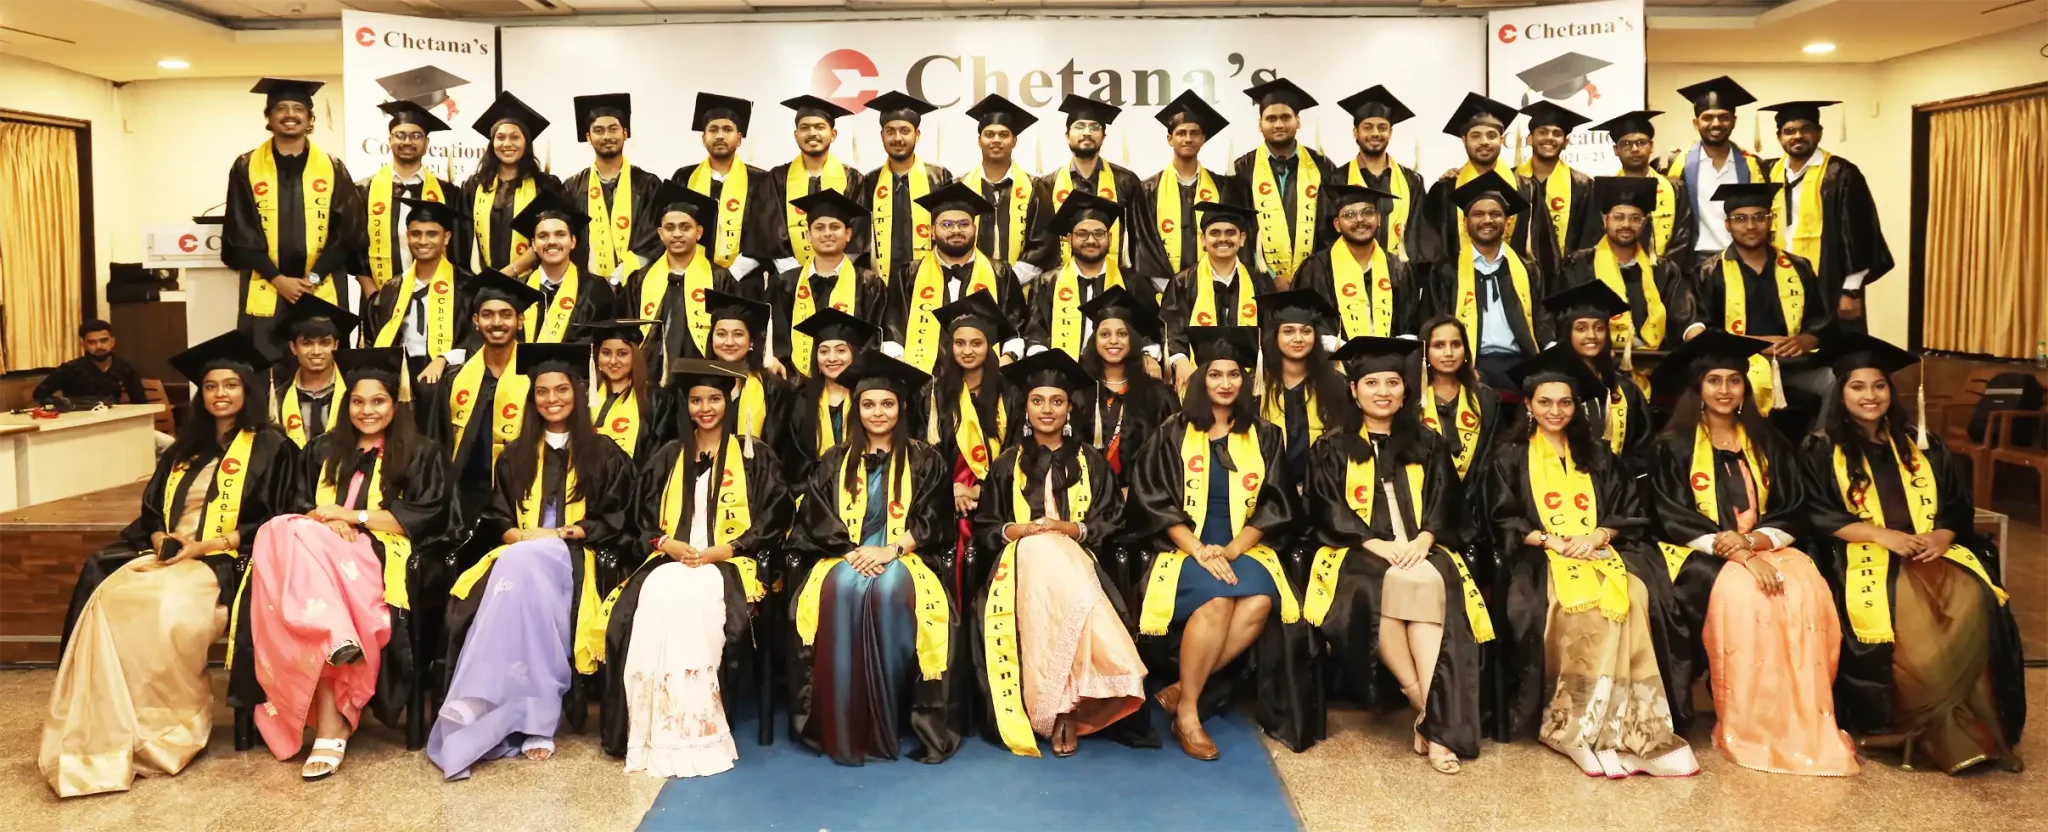 Chetanas Institute of Management and Research